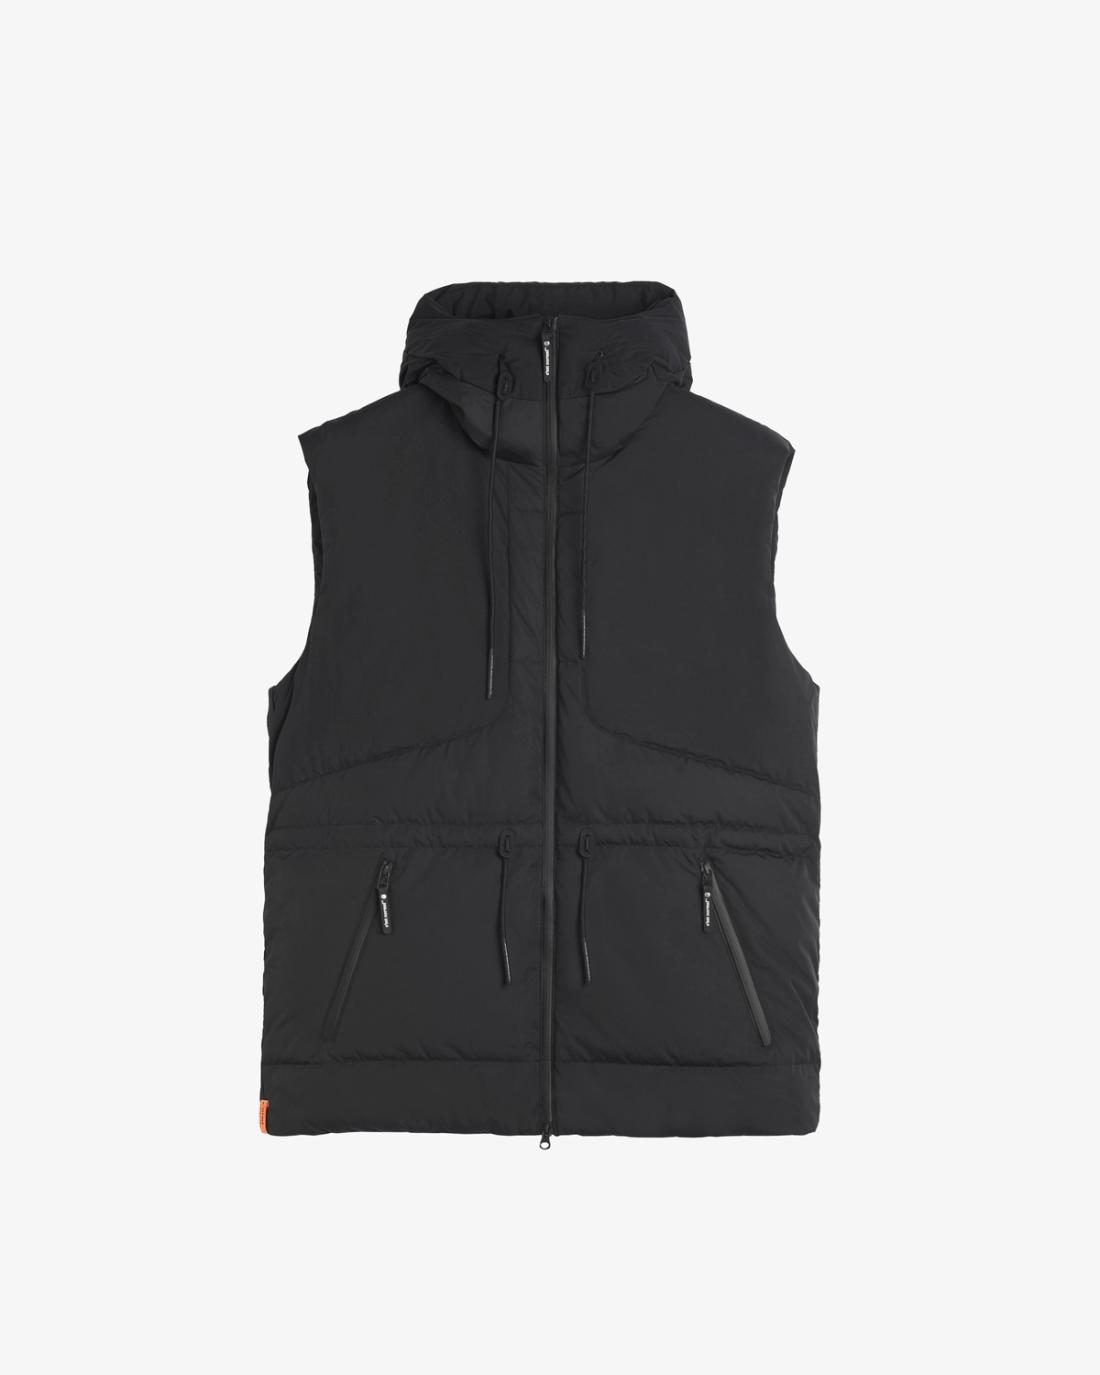 The Ultimate Vest 